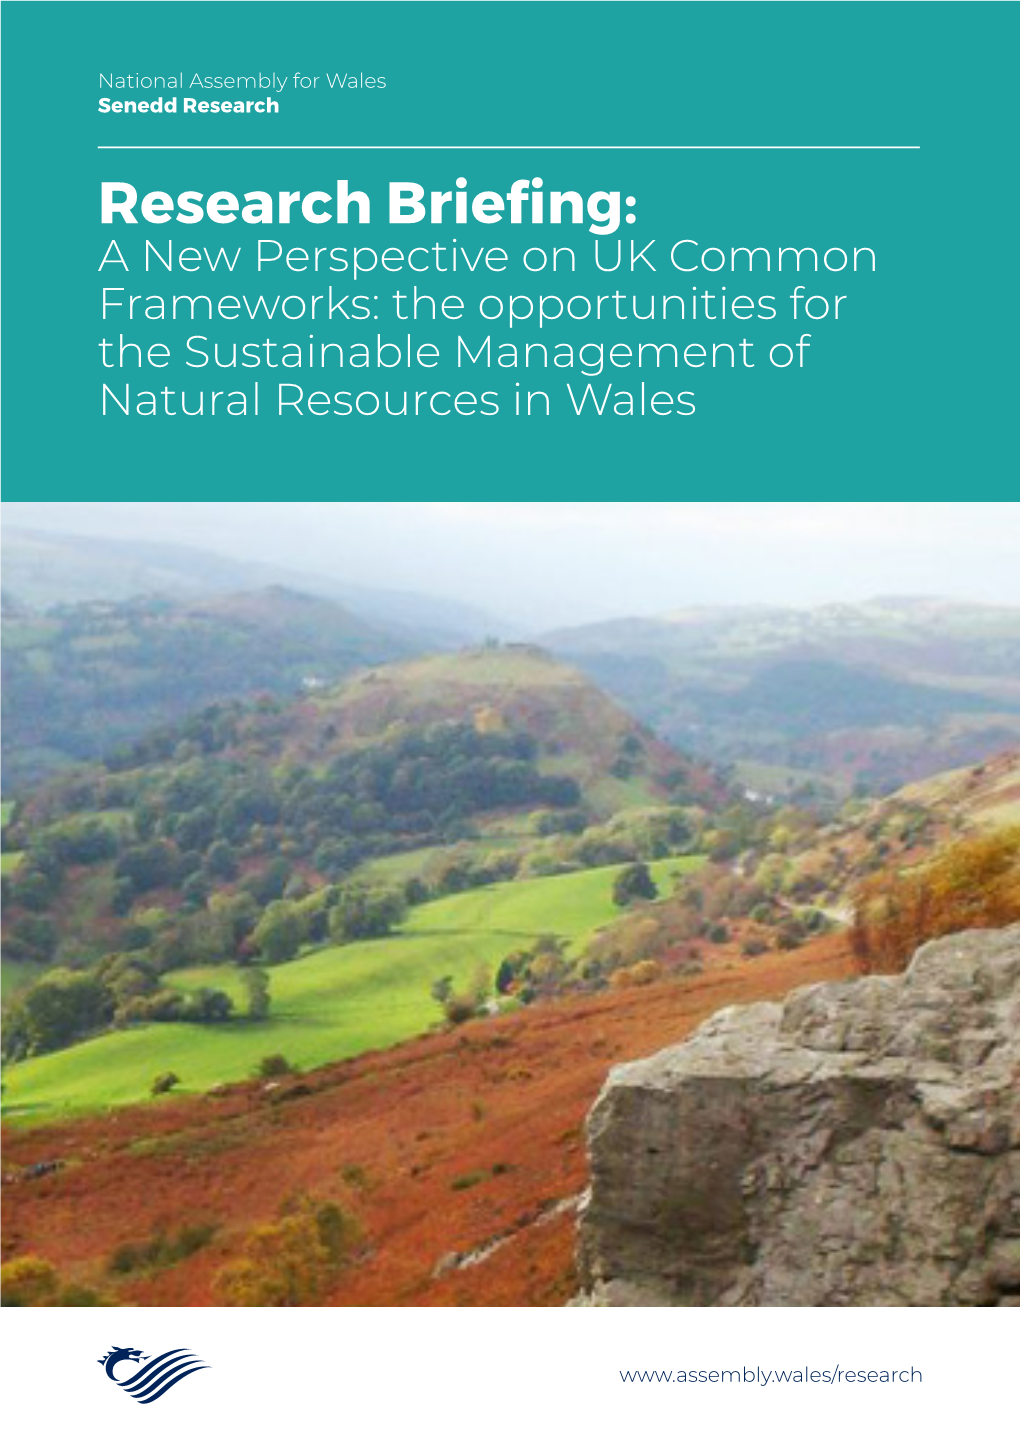 Research Briefing: a New Perspective on UK Common Frameworks: the Opportunities for the Sustainable Management of Natural Resources in Wales